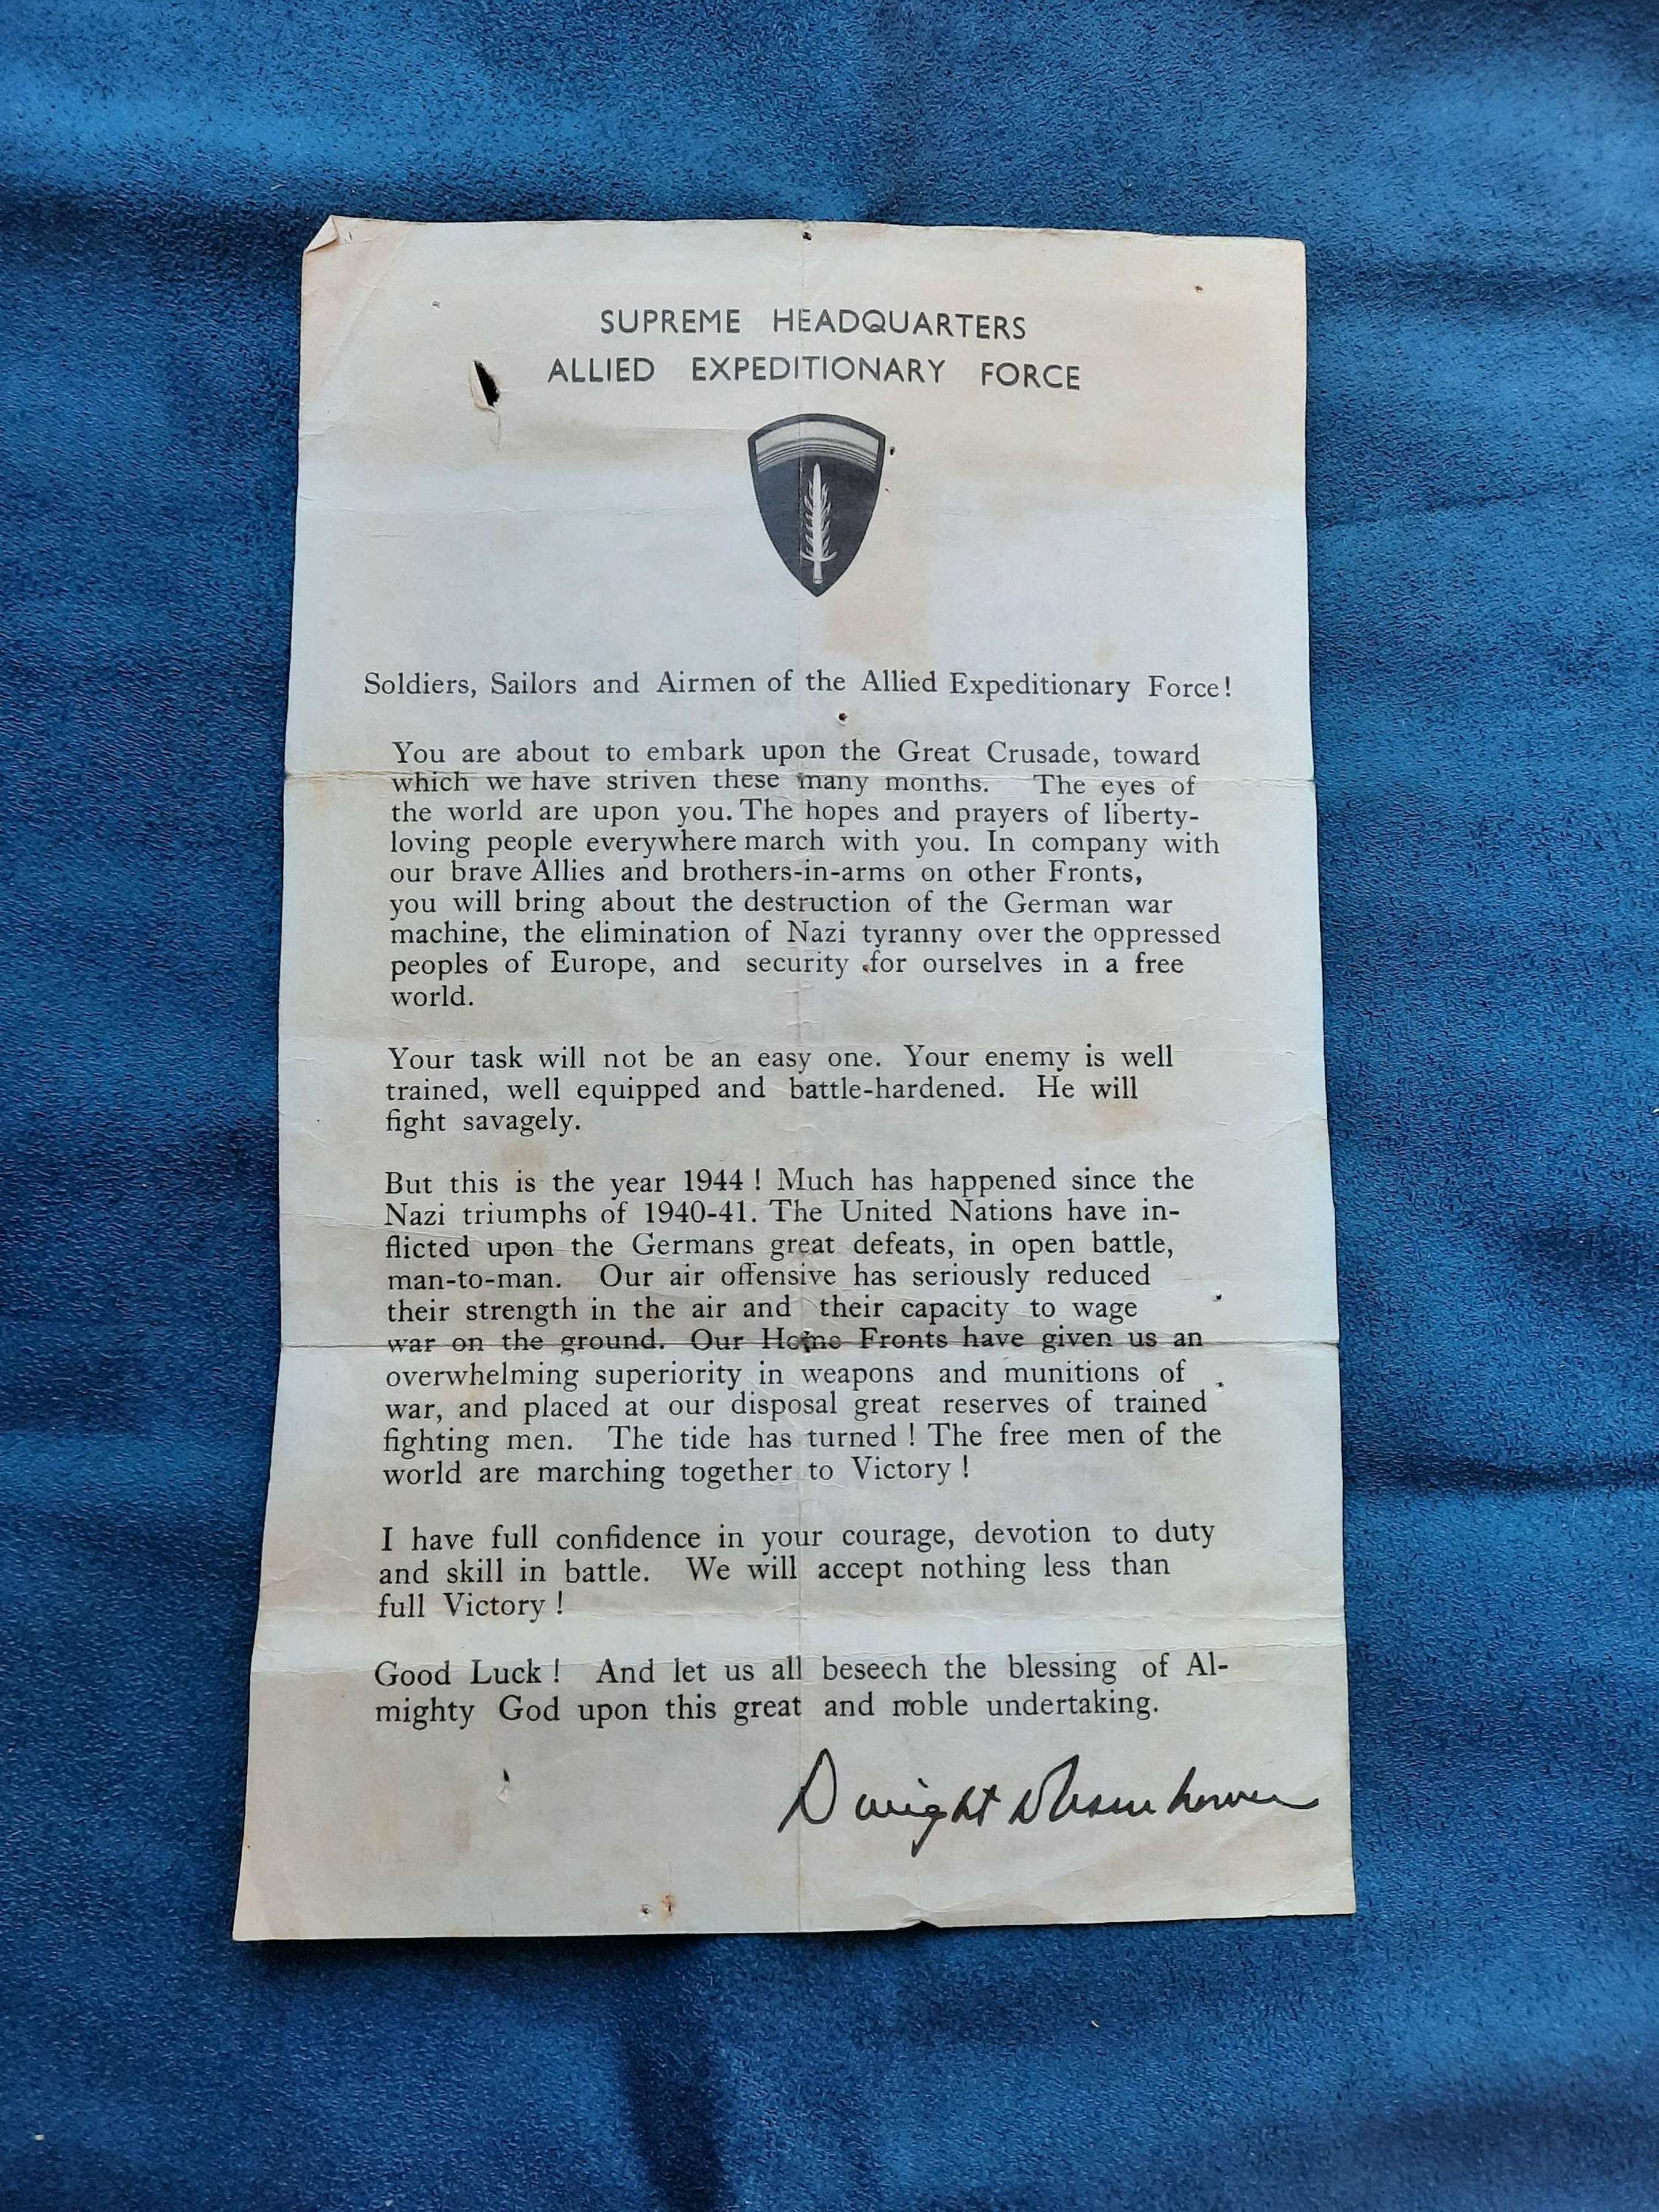 D-Day SHAEF Eisenhower Letter to the Troops